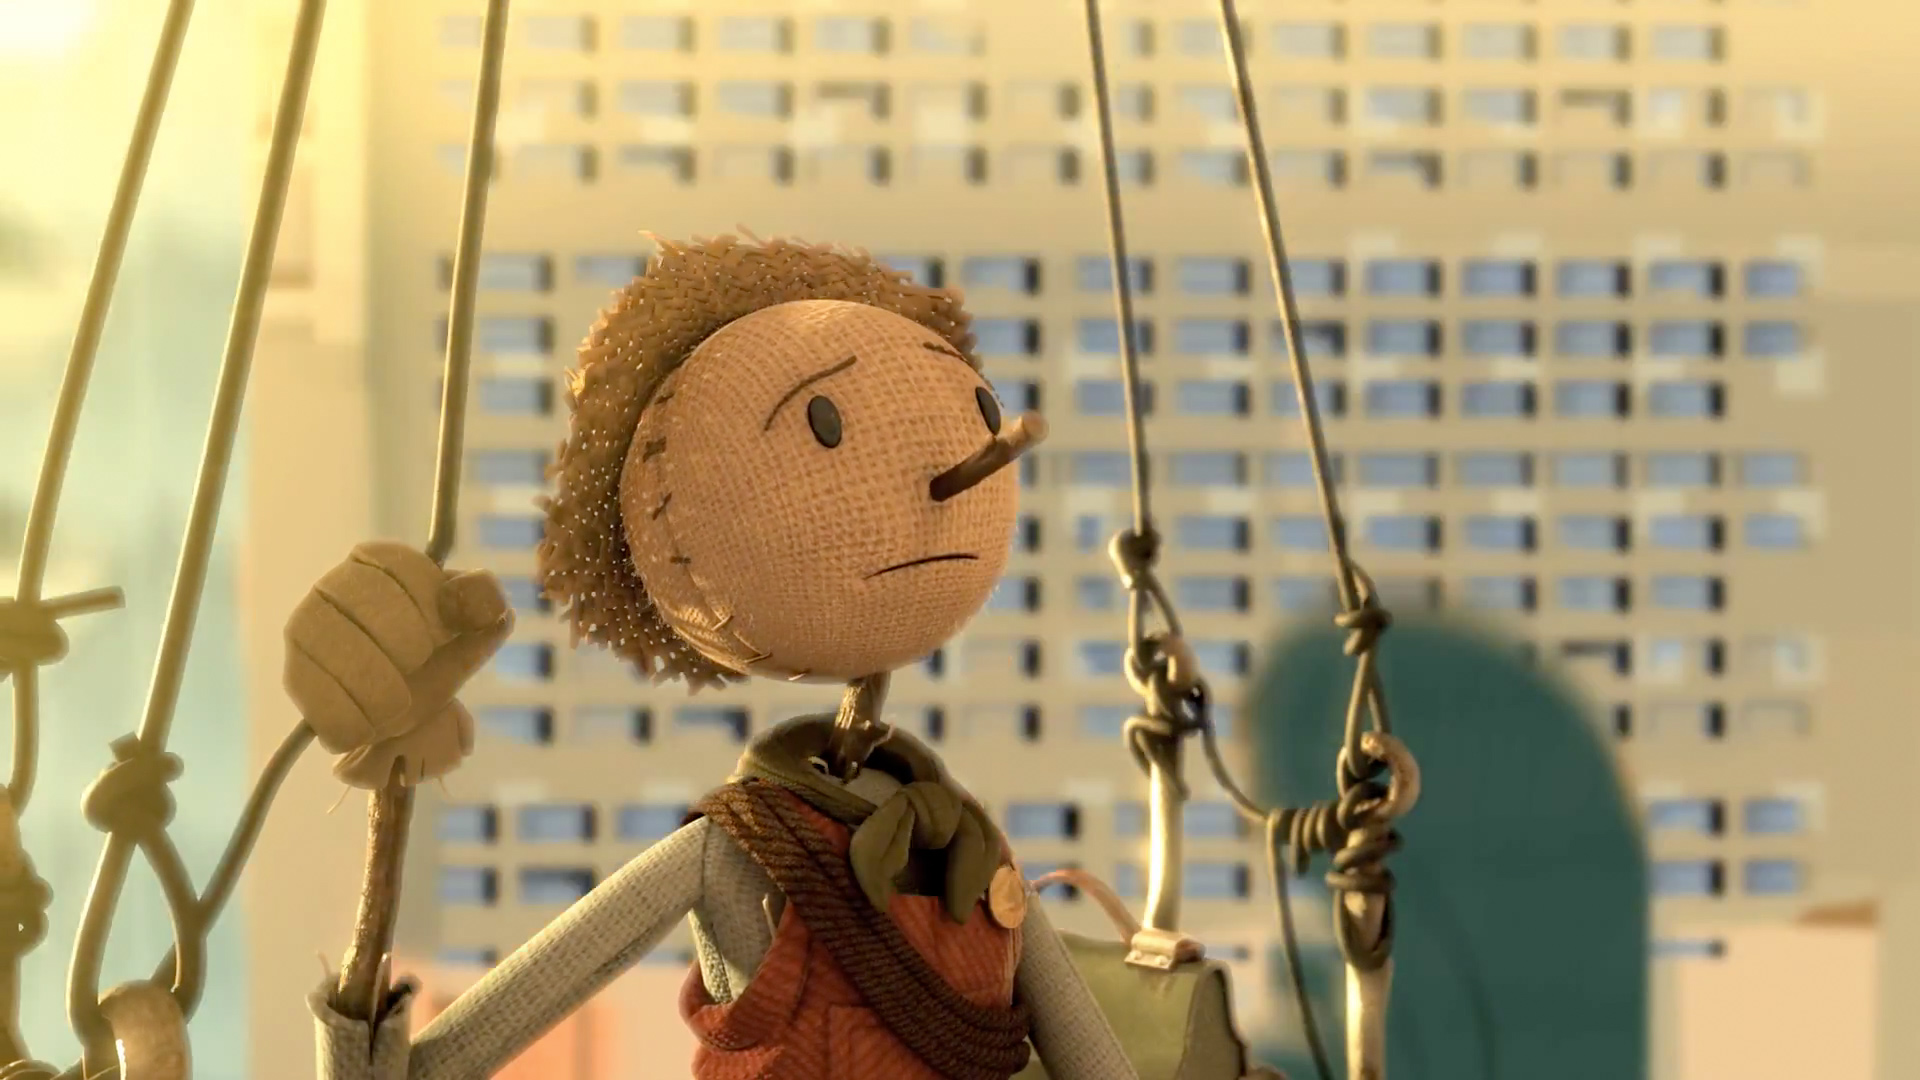 chipotle-creates-great-animated-short-film-the-scarecrow-11.jpg